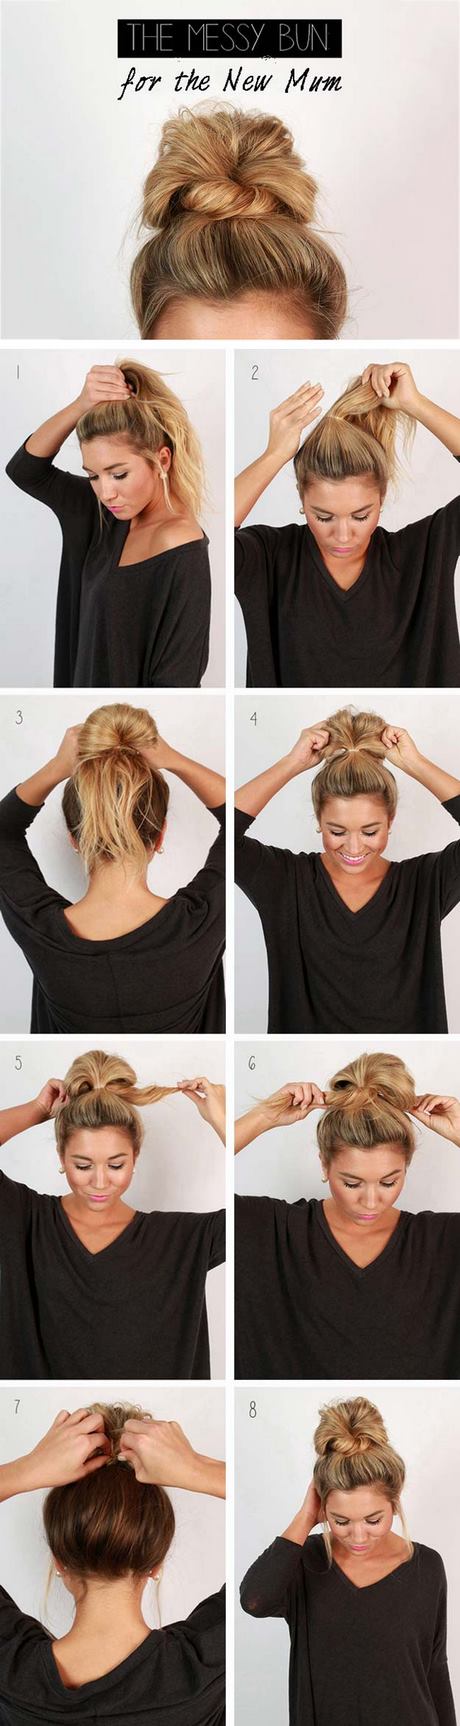 Easy hairstyles to do with straight hair easy-hairstyles-to-do-with-straight-hair-25_7